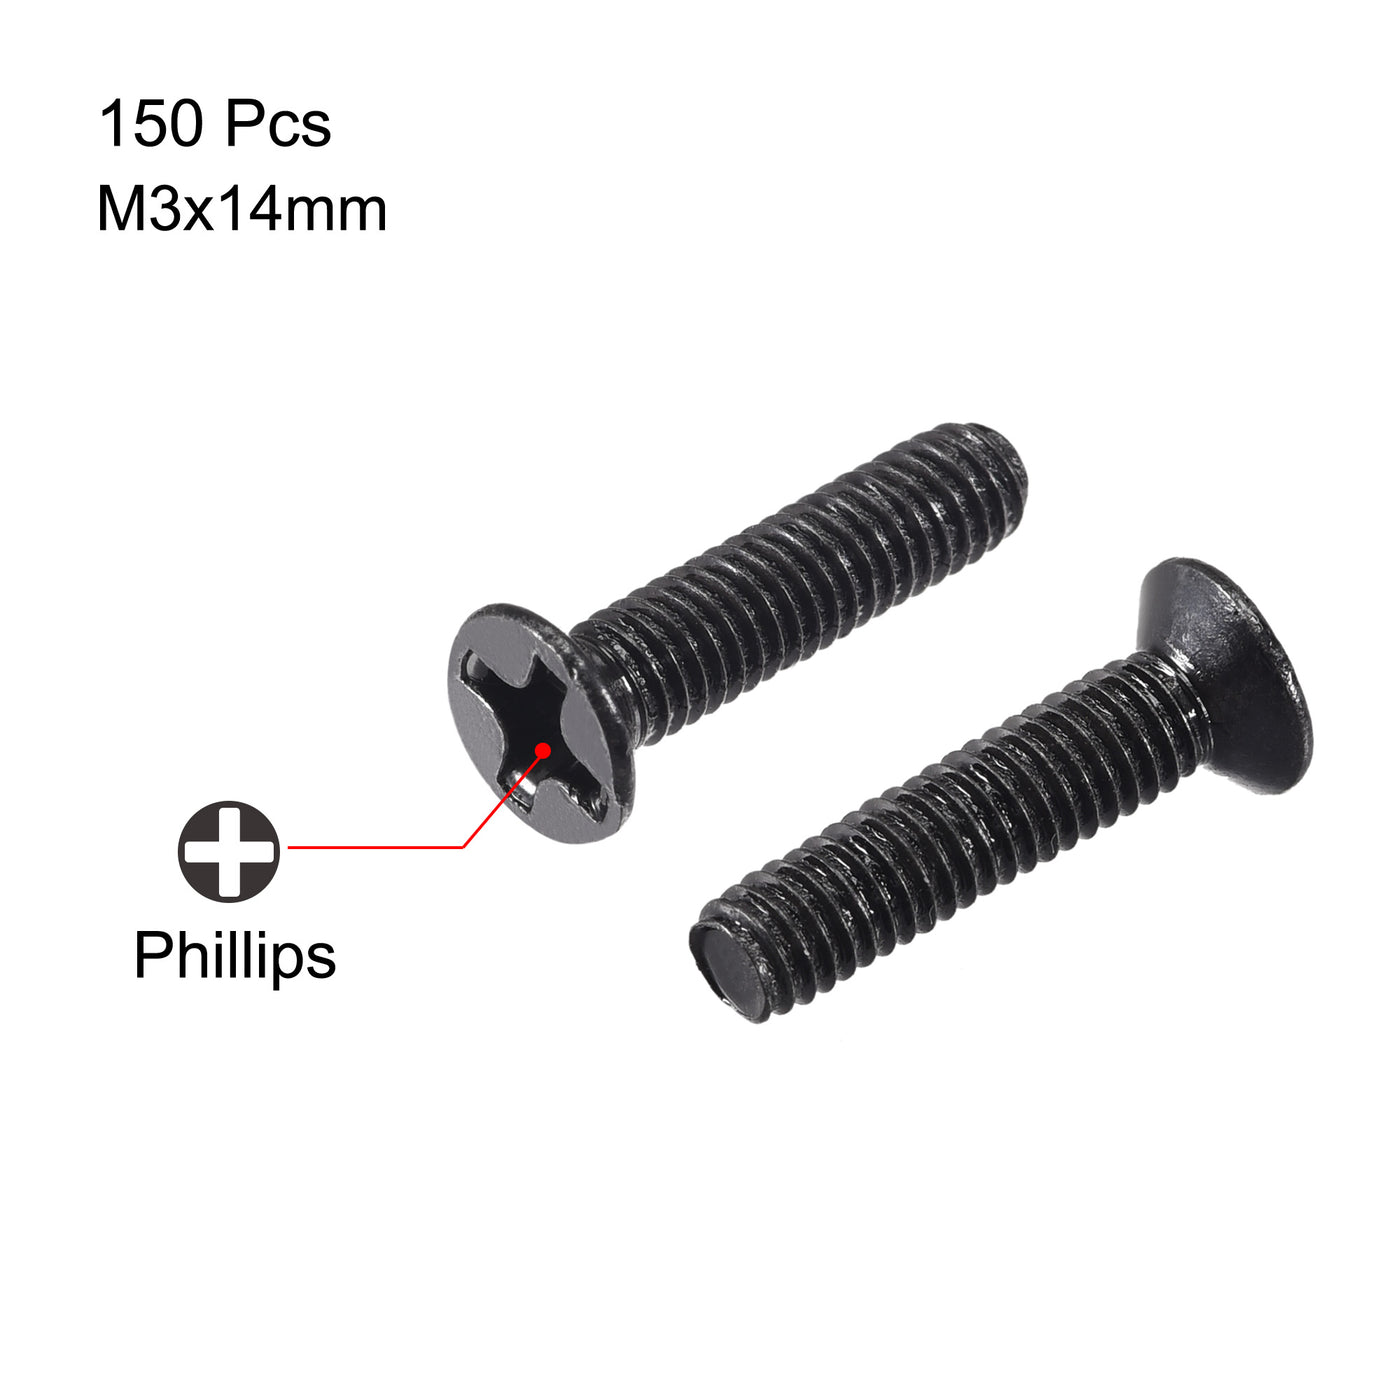 uxcell Uxcell M3 x 14mm Phillips Flat Head Screws Carbon Steel Machine Screws Black for Home Office Computer Case Appliance Equipment 150pcs